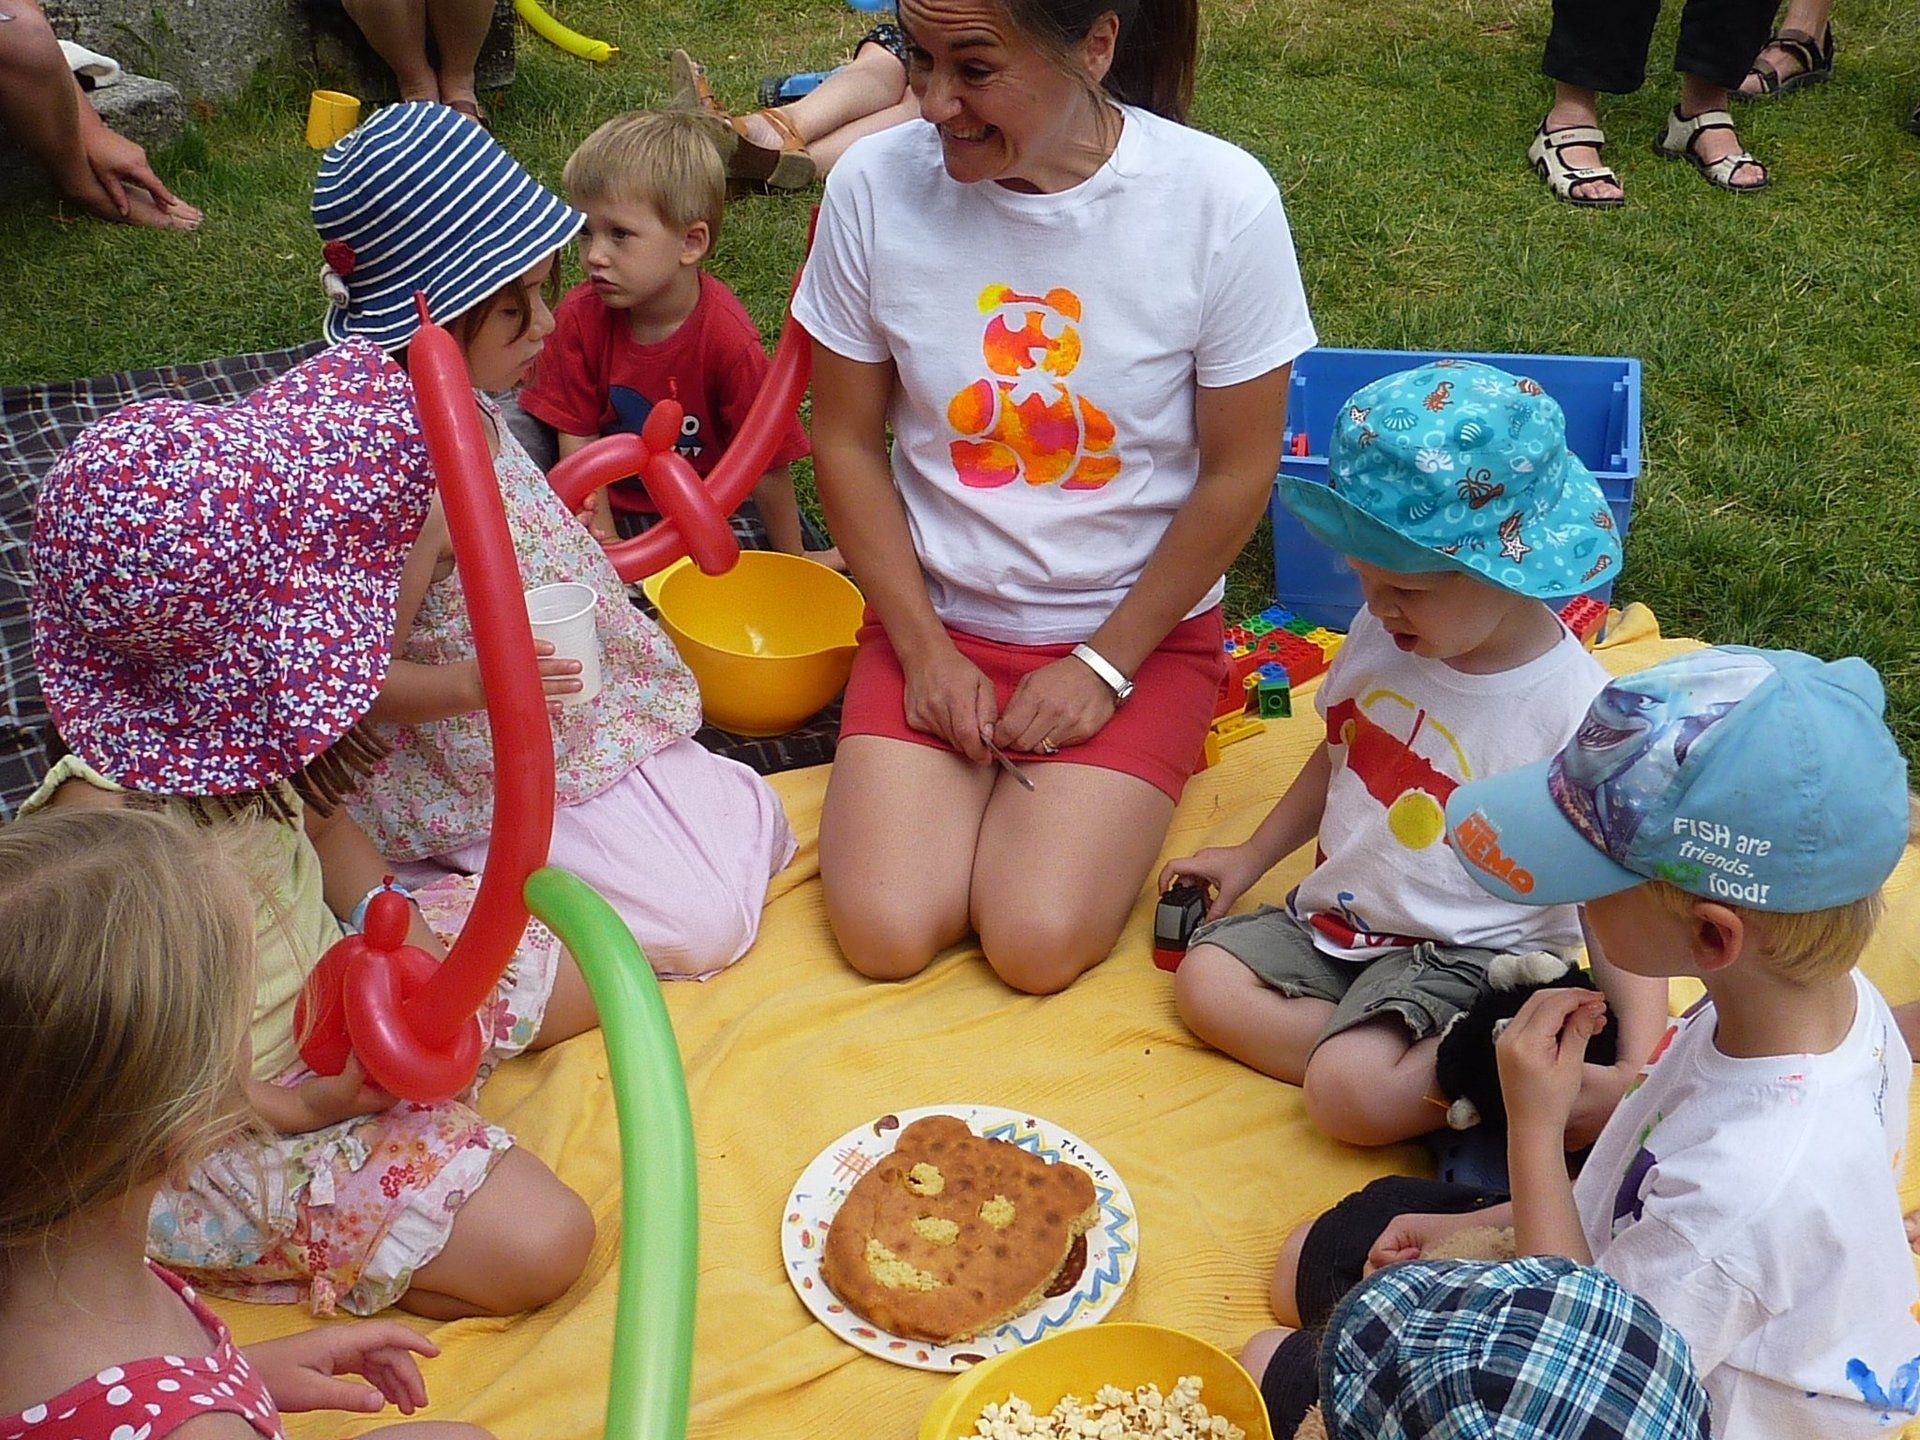 teddy bear picnic with children in a circle looking at a cake